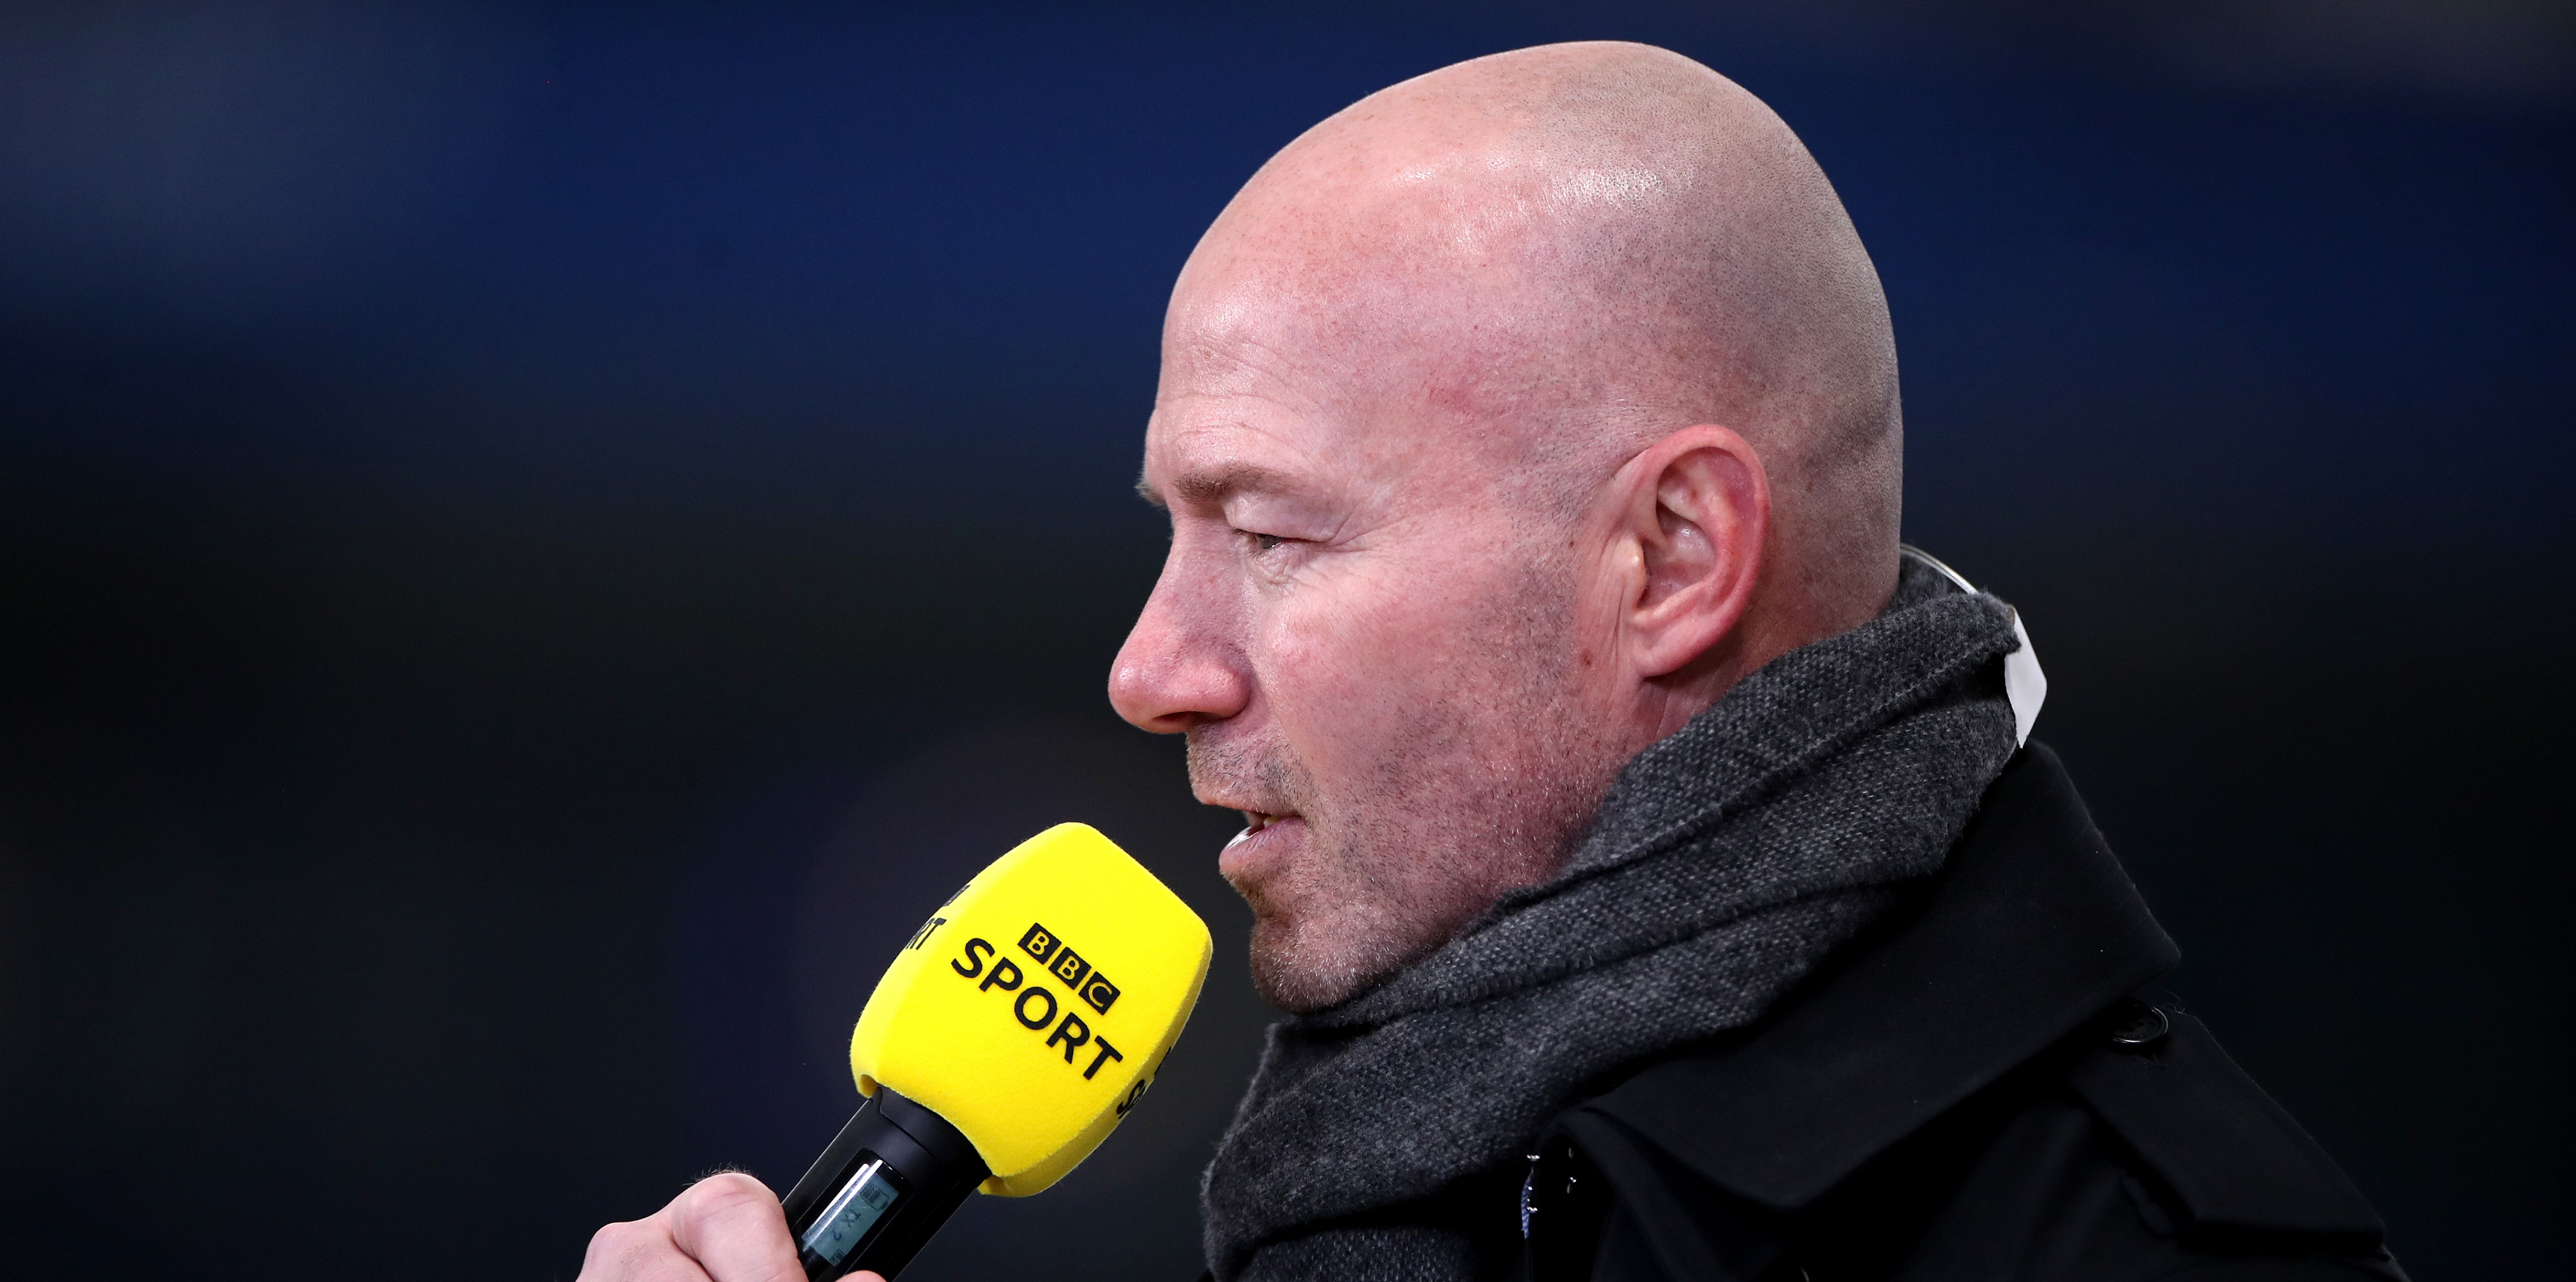 Shearer claims it’s an ‘exciting’ time to be a Liverpool fan and marvels at ‘unbelievable’ Reds star